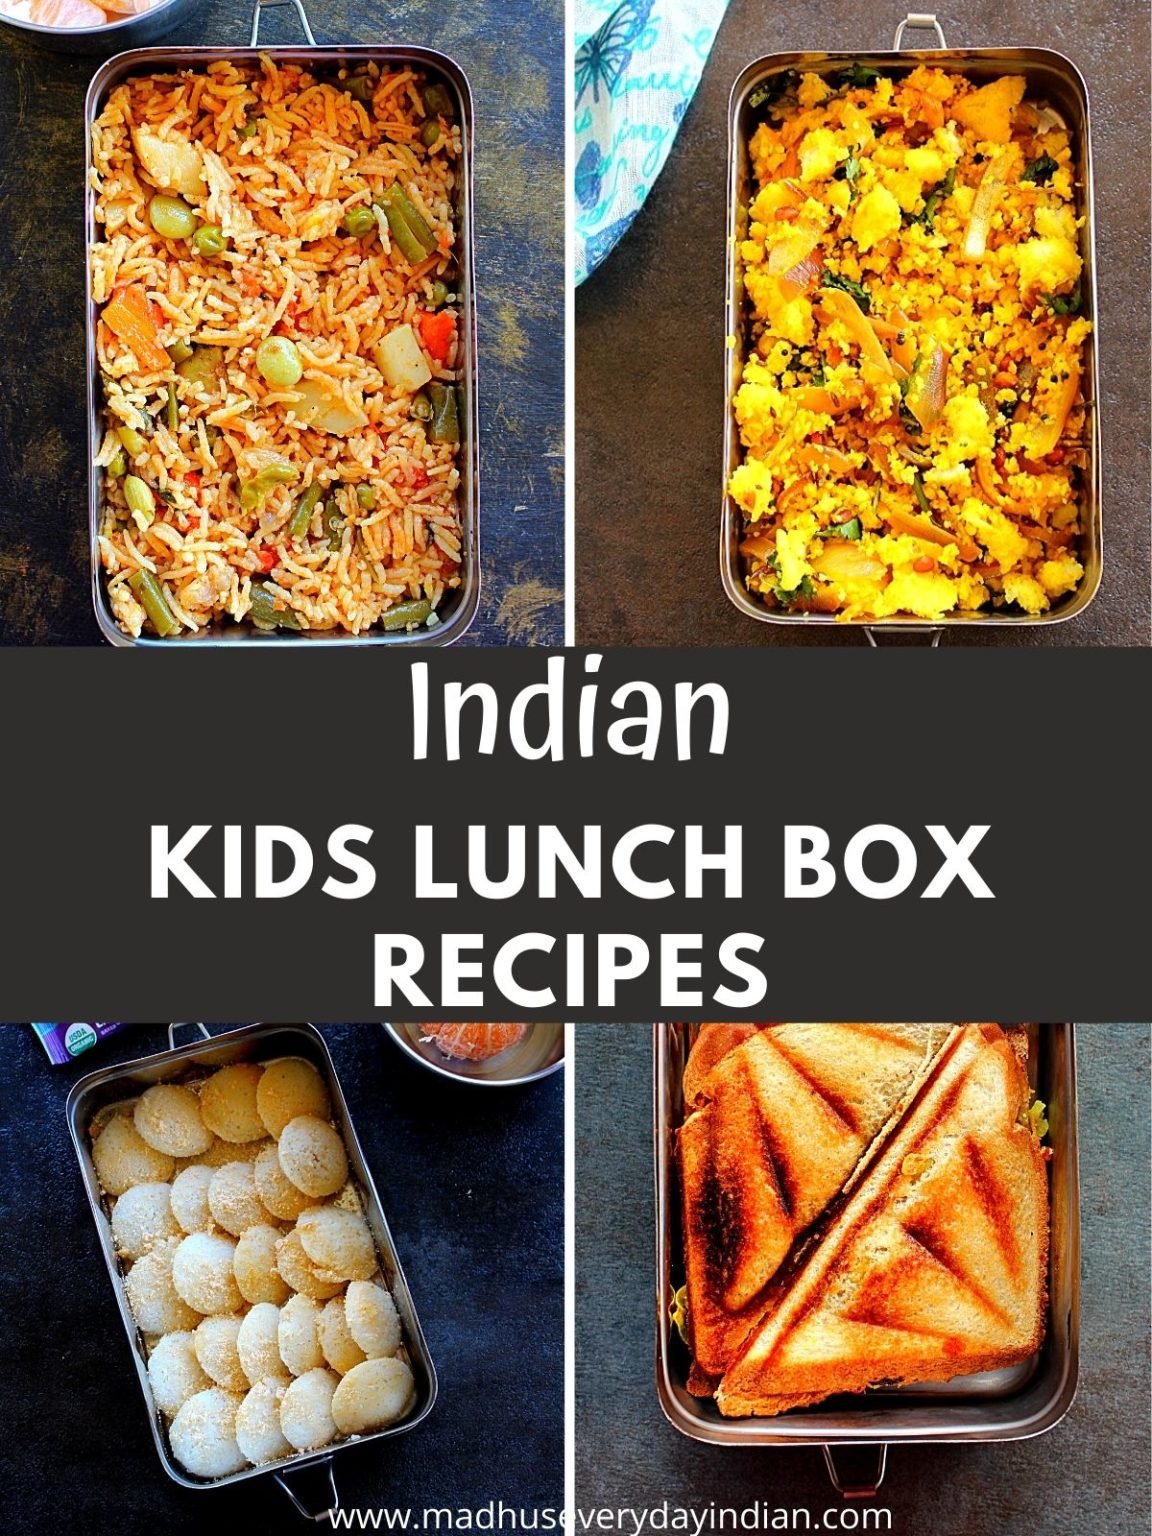 22+ Kids Lunch Box Recipes (Indian) Madhu's Everyday Indian